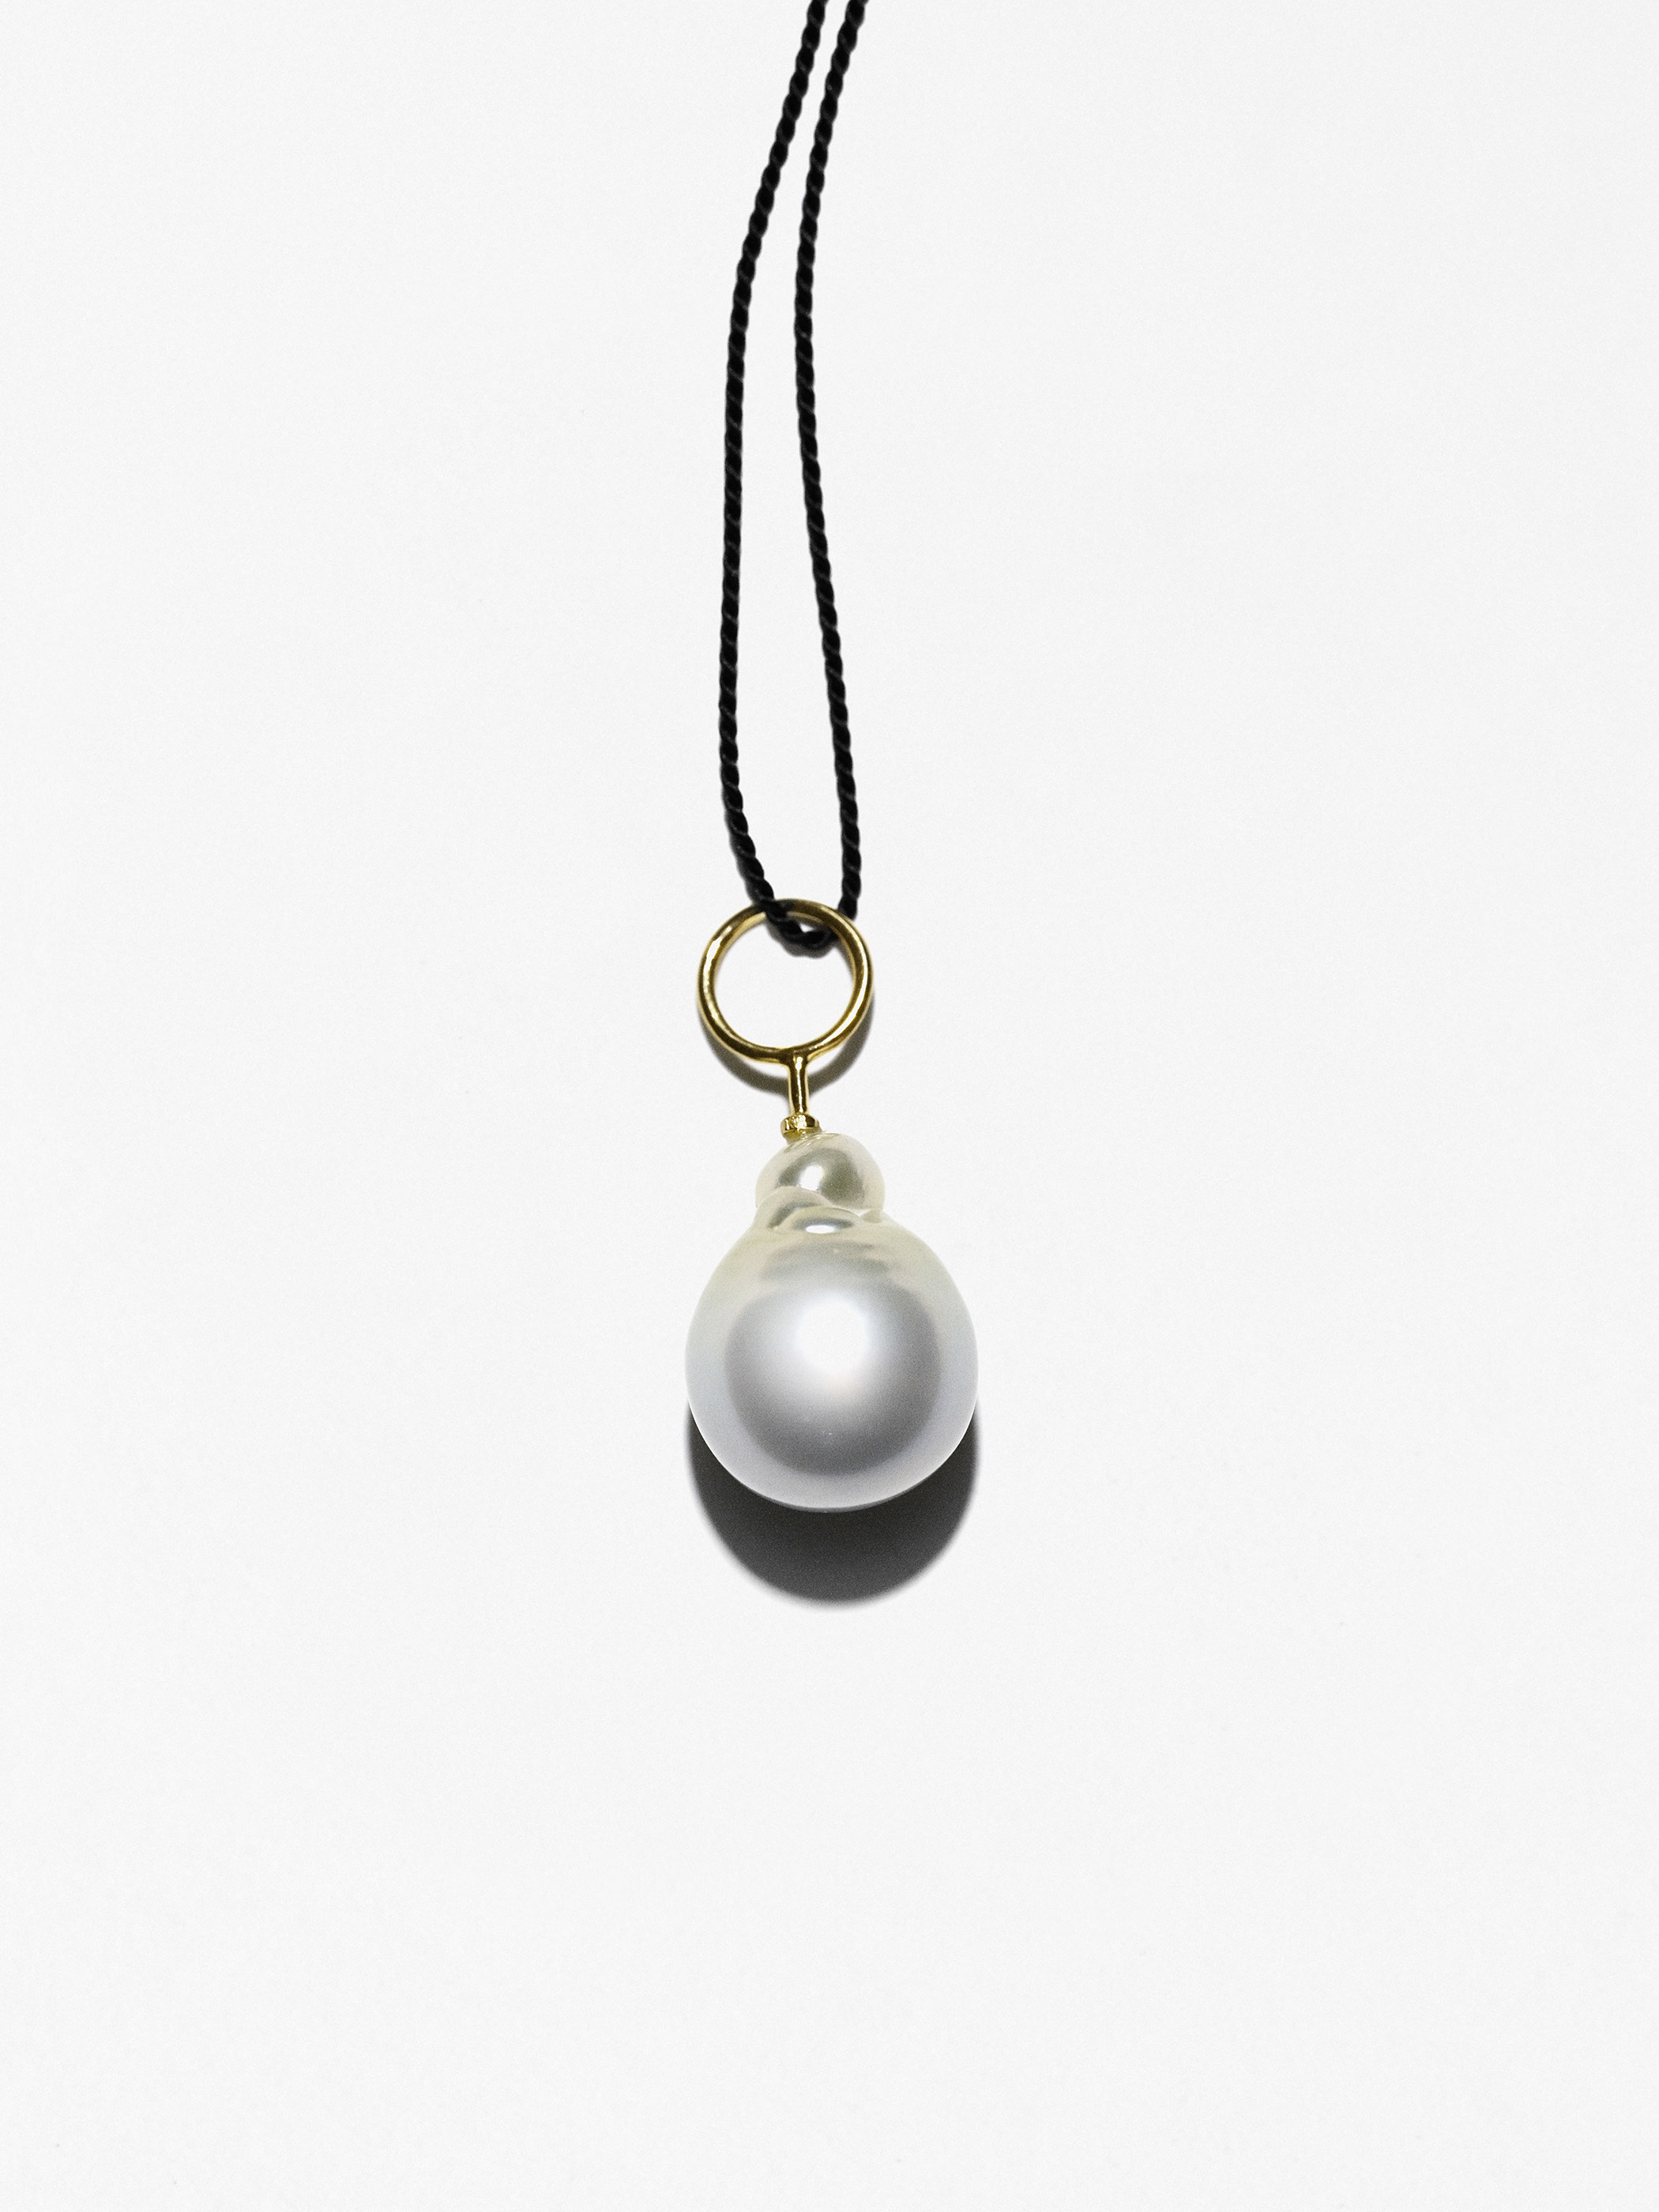 Baroque pearl バロックパール ネックレス - su official online shop